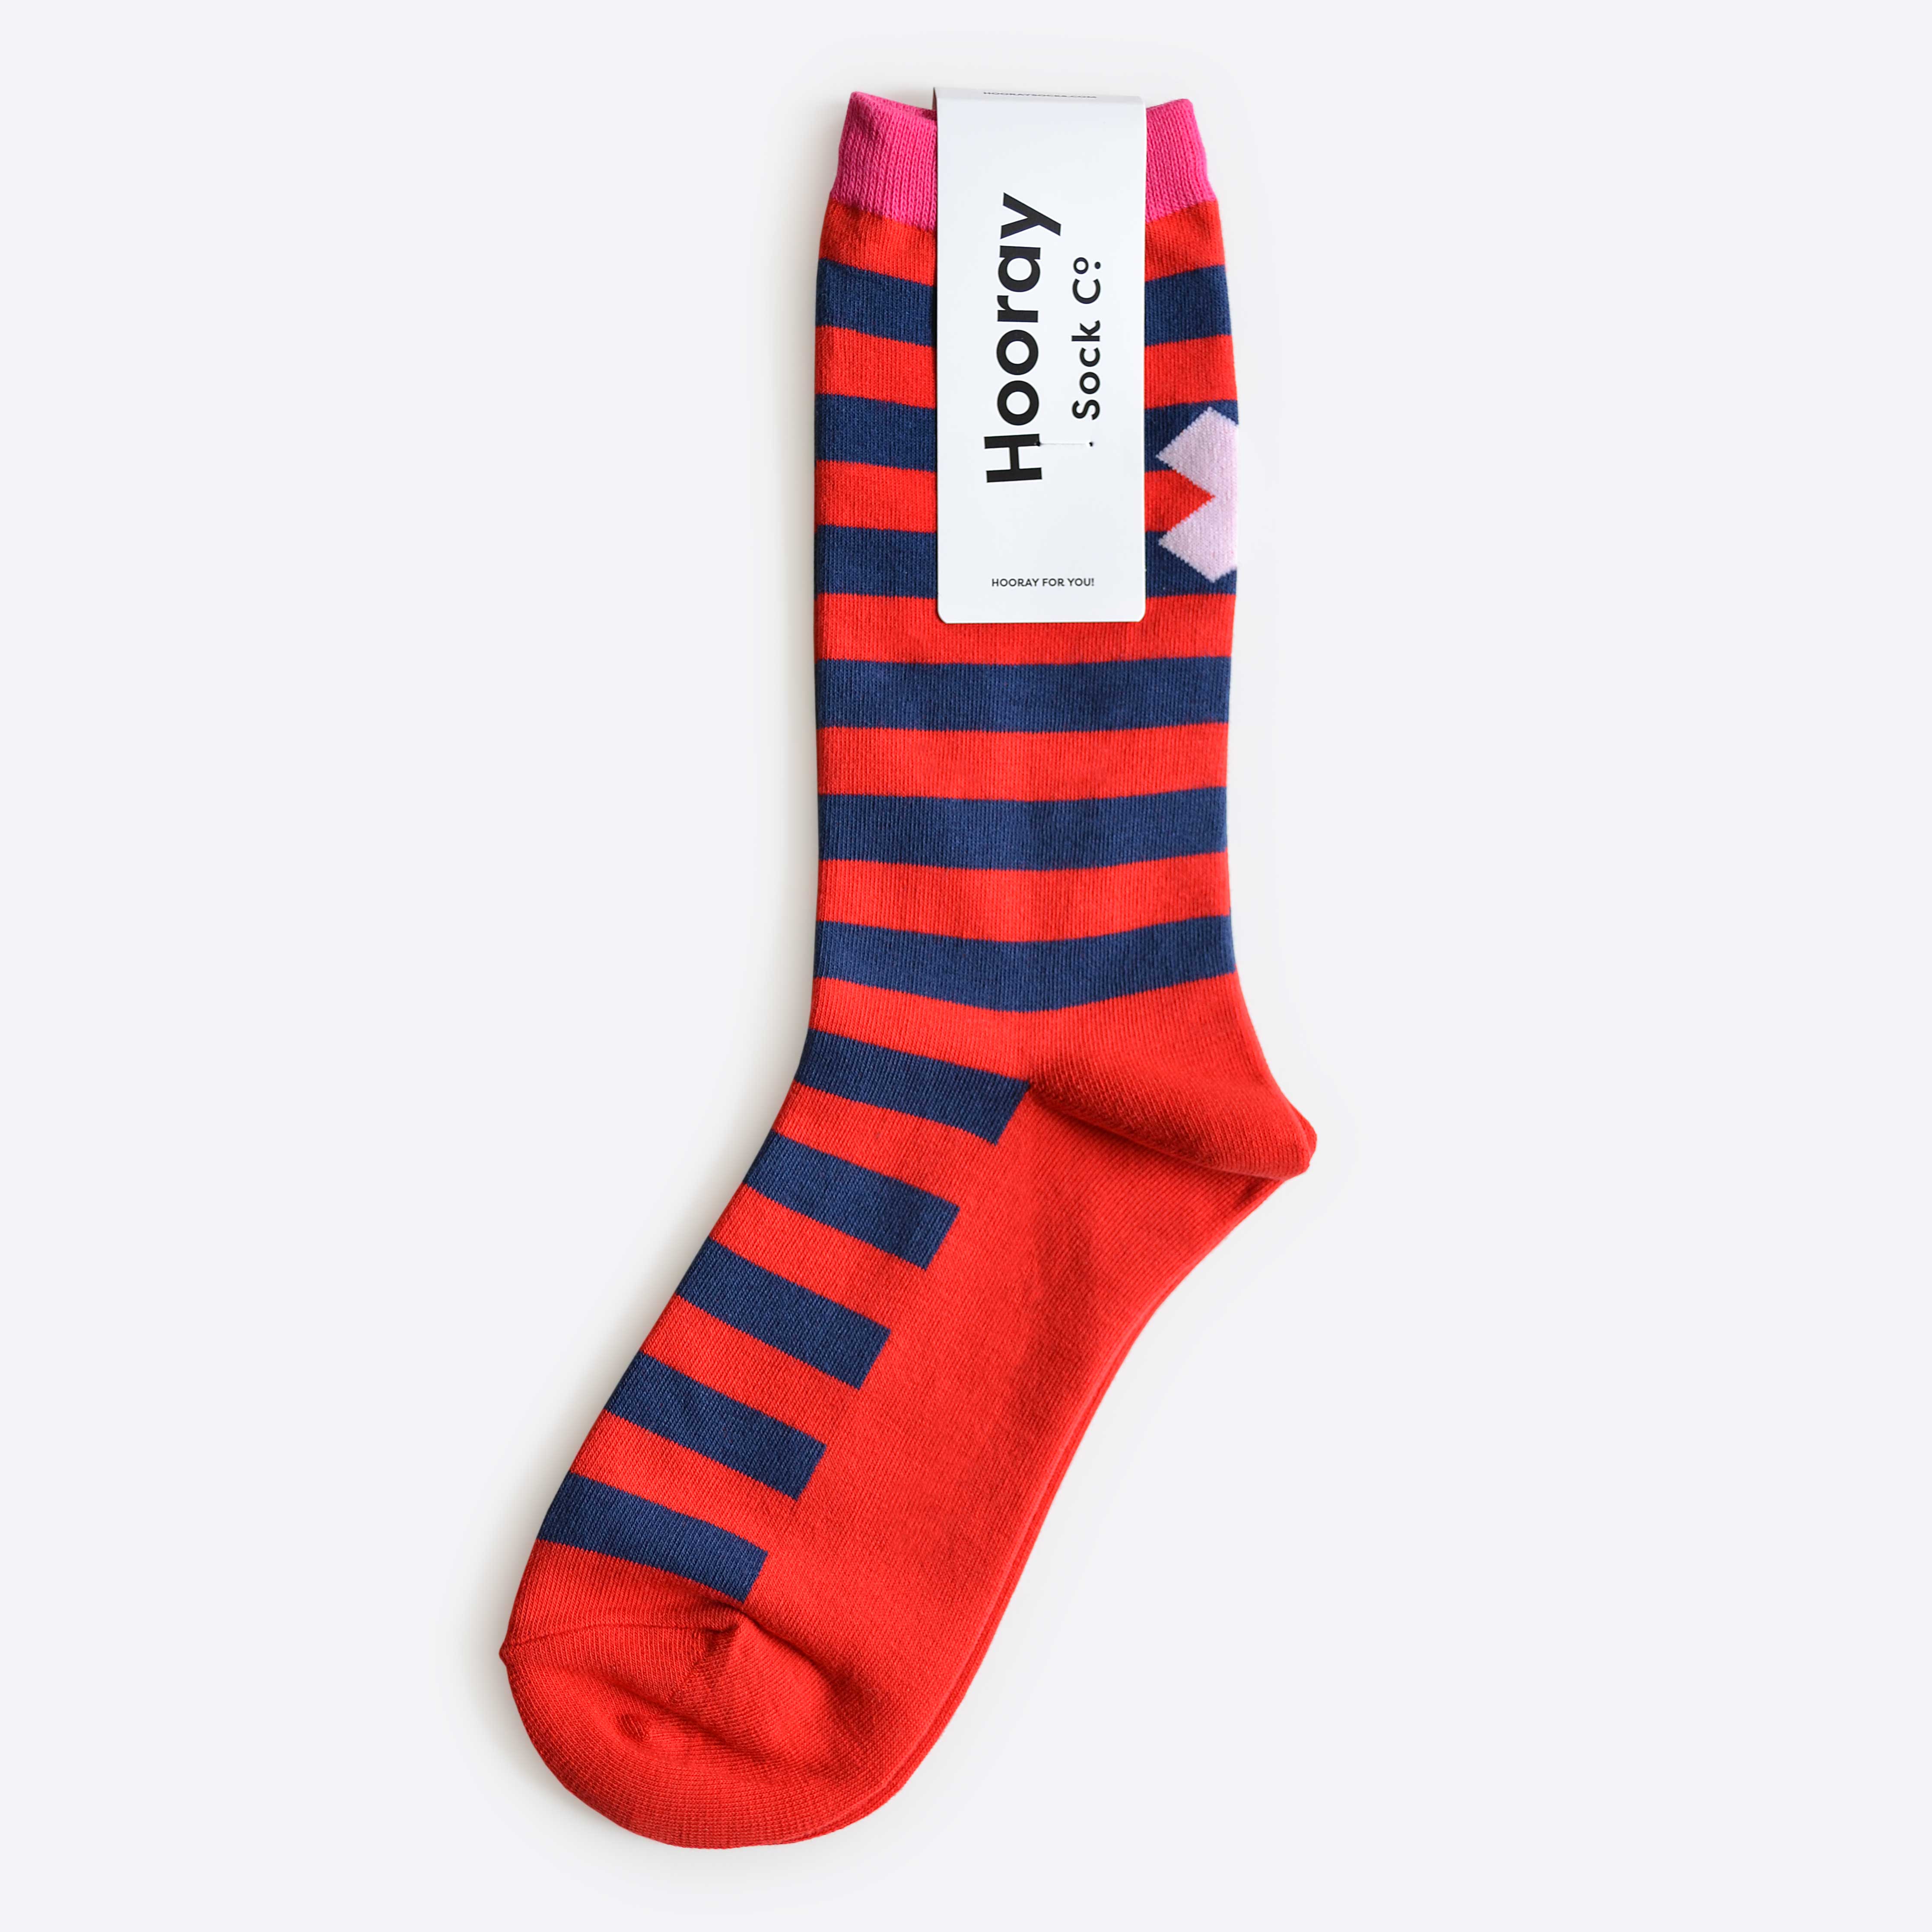 Hooray Sock Co. Taylor Red and Blue Stripe Crew Socks. Bold graphic &#39;X&#39; on back. Crew length, 80% cotton, 20% spandex. Sizes: Large (US men’s 8-12), Small (US women&#39;s 4-10). 